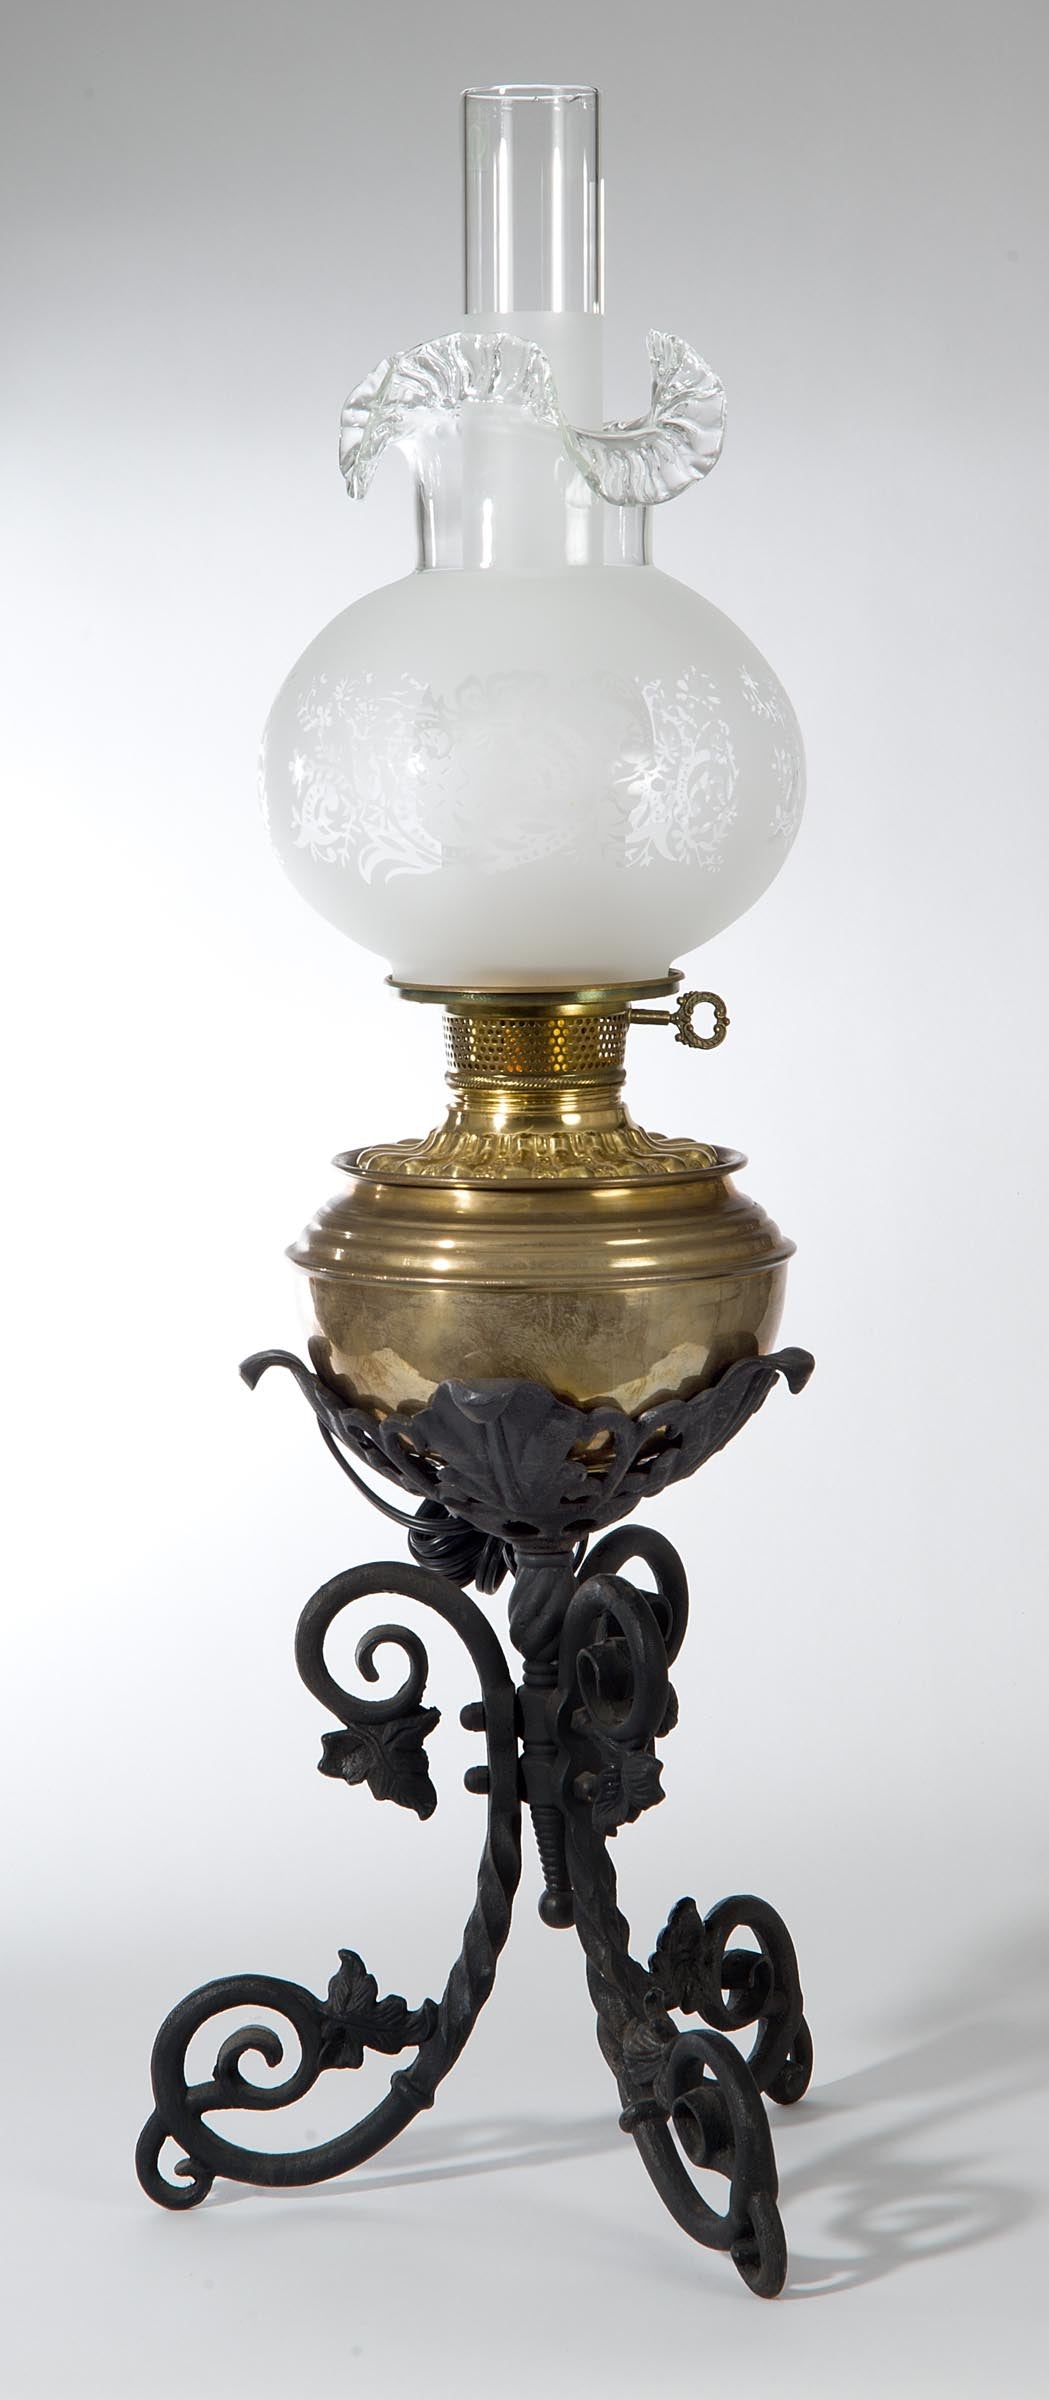 Victorian Style Etched Filigree Gas Table Lamp Shade, 9 1/4 inch tall, 4 inch fitter (00148)